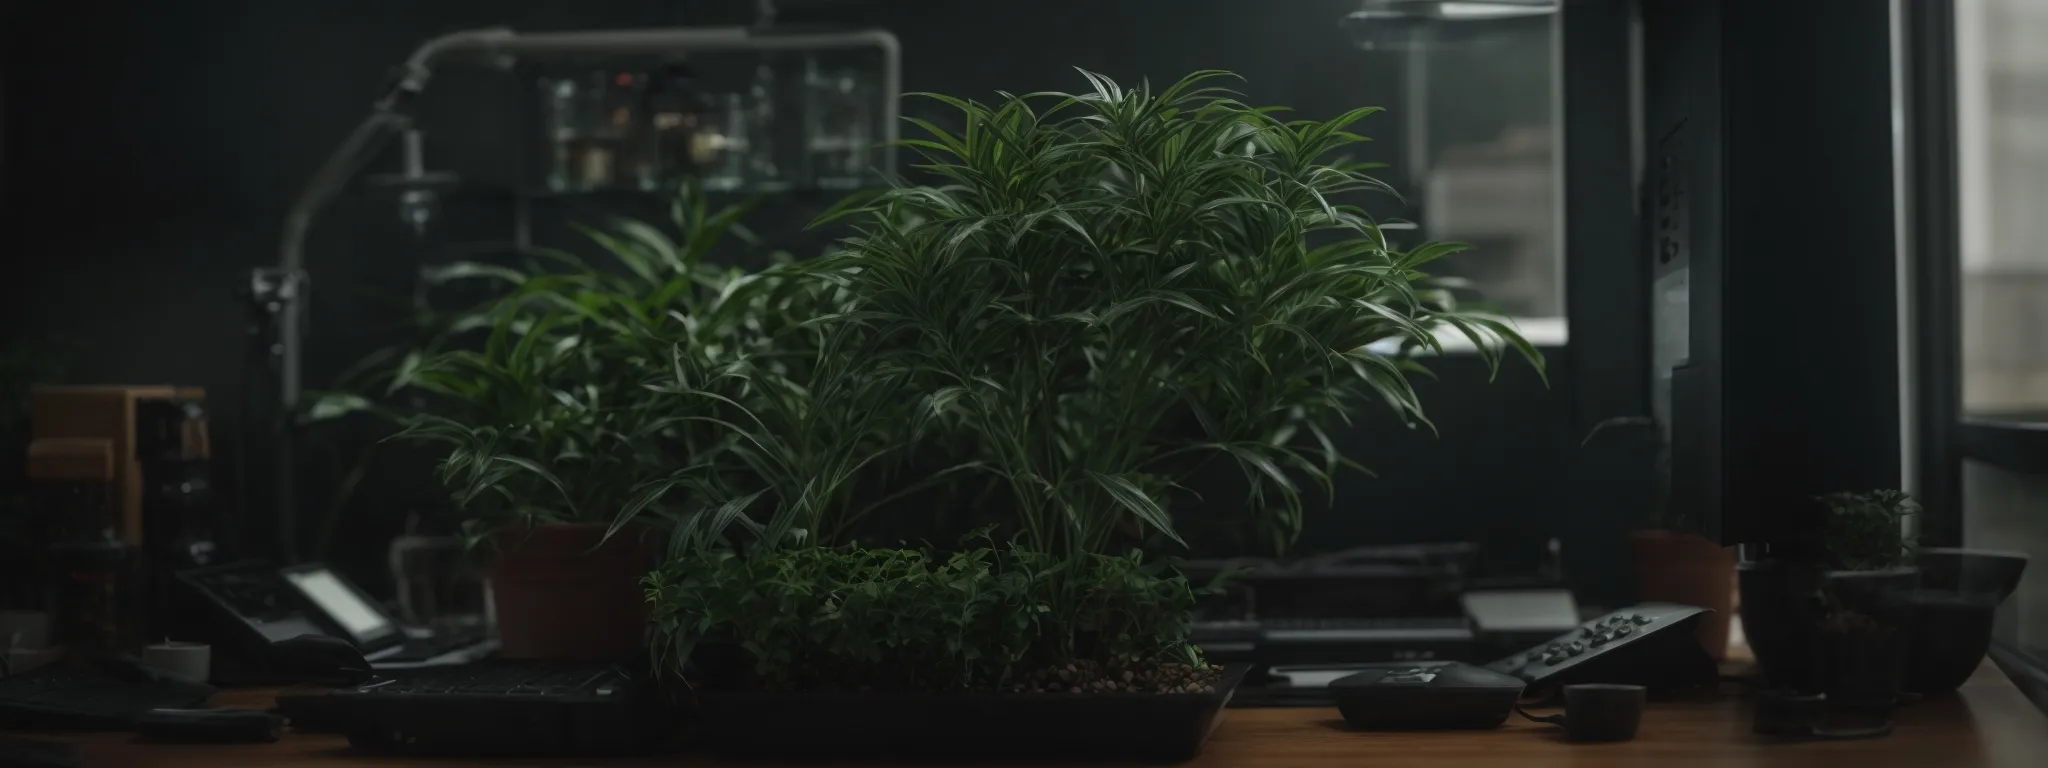 a growing plant by a computer symbolizes the scalability and long-term support in digital marketing.